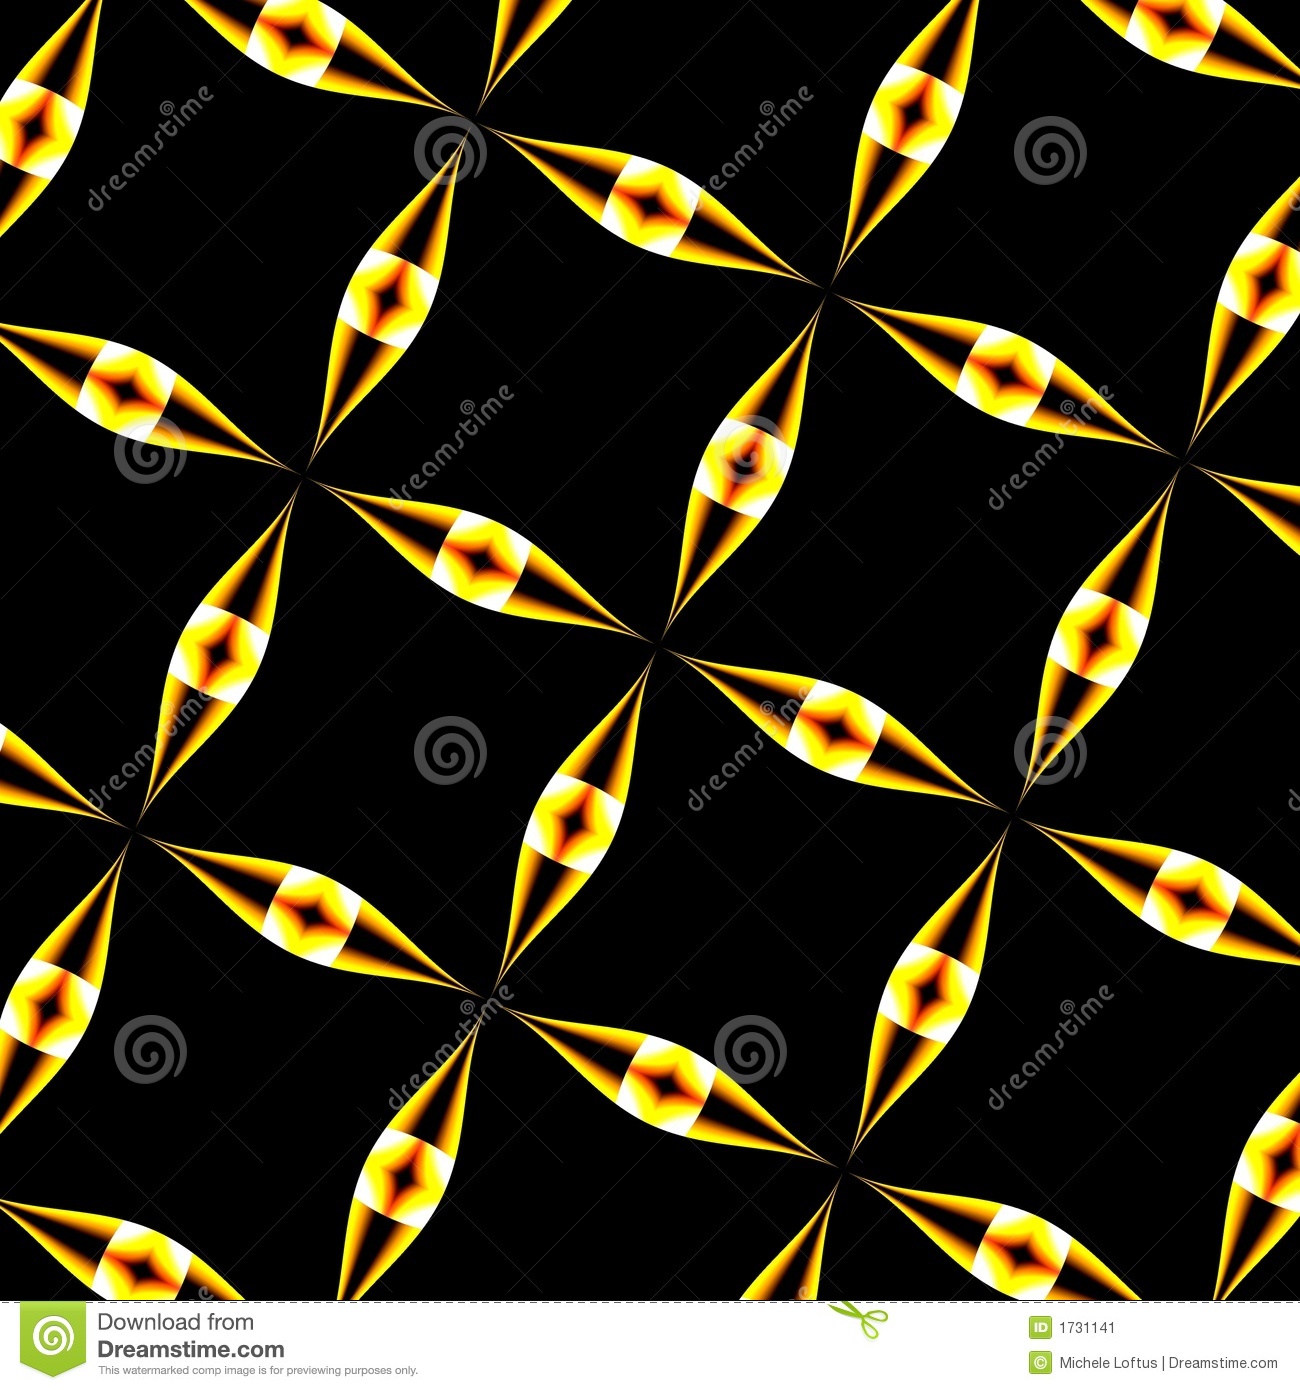 Black And Gold Abstract Background Or Wallpaper - Black And Gold Material - HD Wallpaper 